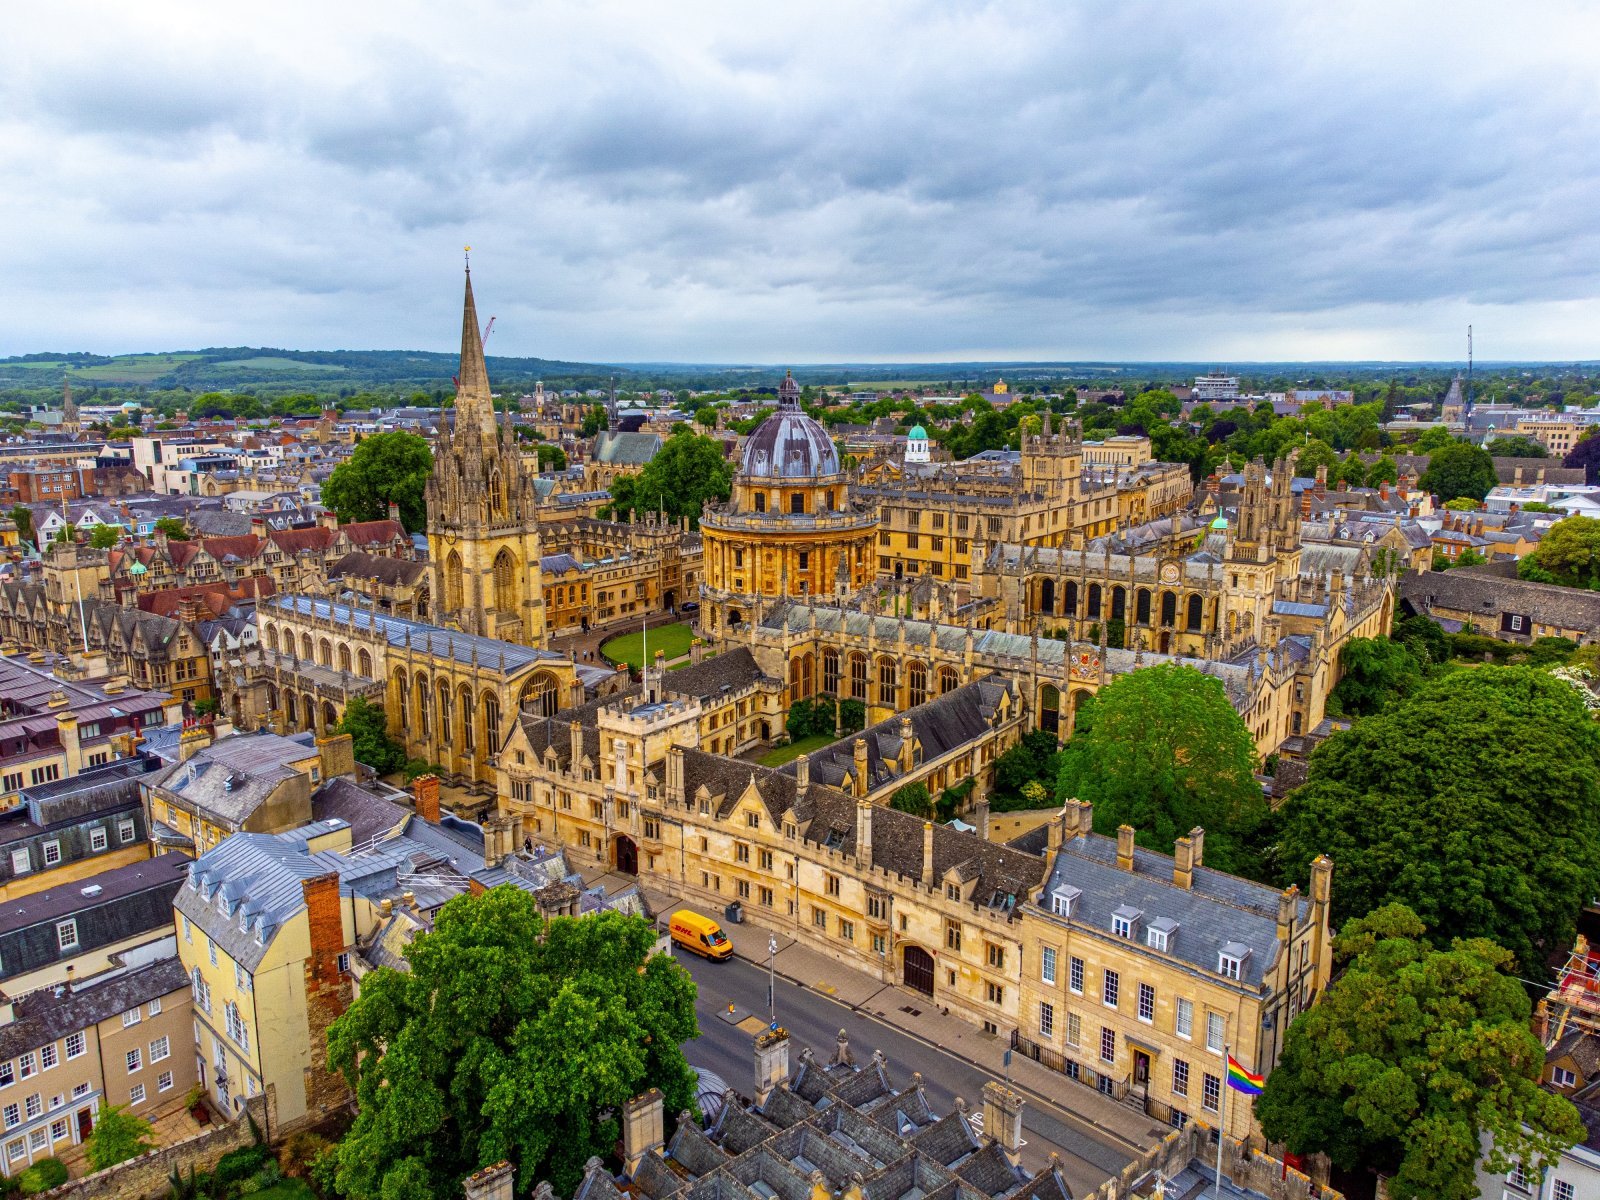 <p class="wp-caption-text">Image Credit: Shutterstock / 4kclips</p>  <p><span>Oxford, the epitome of academic excellence, offers students a chance to walk in the footsteps of some of the world’s most brilliant minds. The city’s prestigious university, with its centuries-old colleges, provides a backdrop for a unique study abroad experience combining rigorous academics and rich historical traditions. Oxford’s cobbled streets, bustling markets, and verdant meadows offer a picturesque setting for personal exploration. Students can engage with local and international scholars, participate in formal hall dinners, and participate in lively debates, making their educational journey holistic.</span></p>